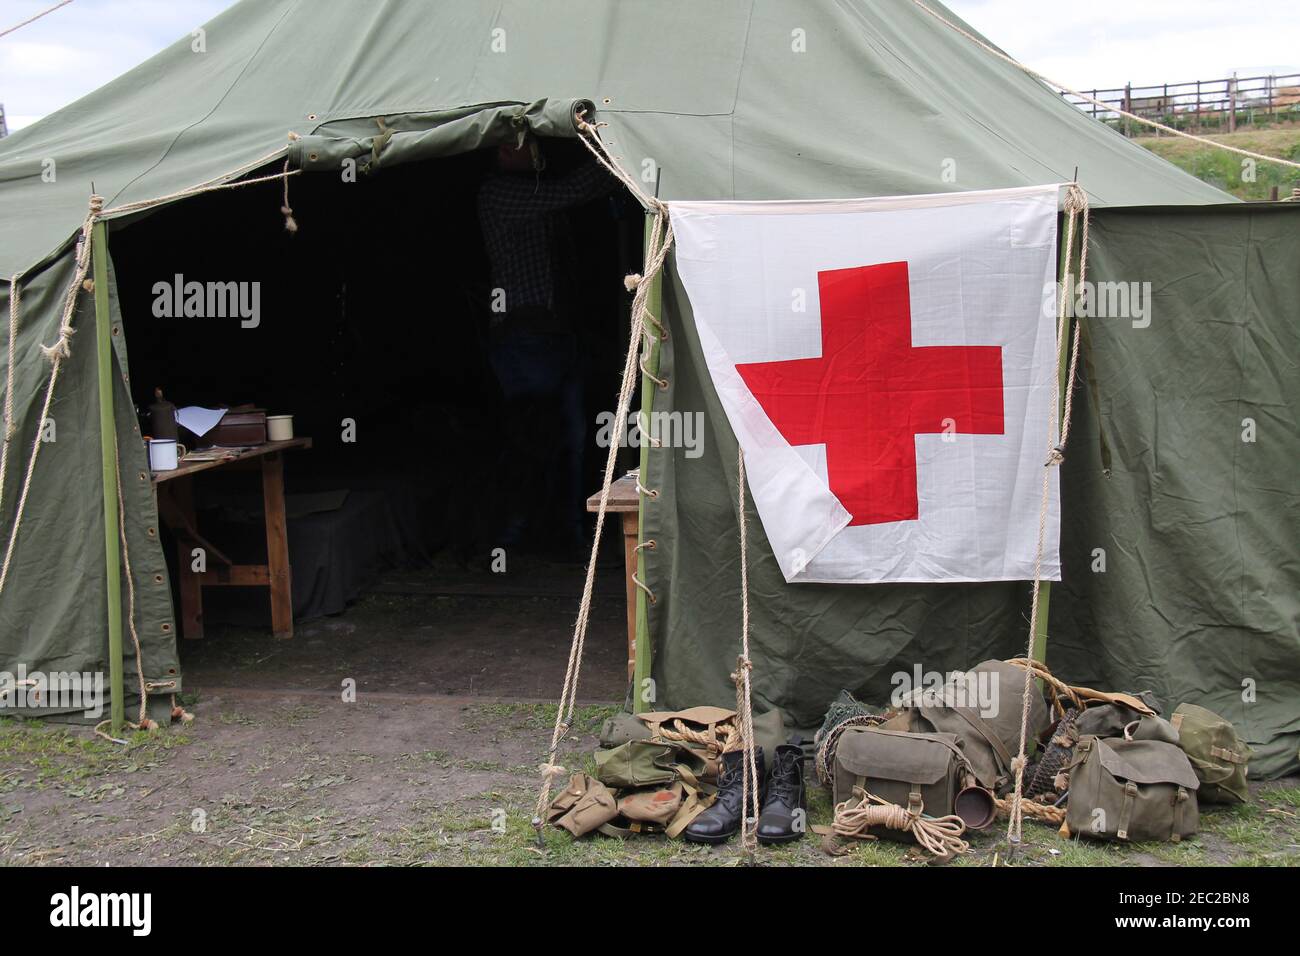 A Vintage Military First Aid Field Hospital Tent Stock Photo - Alamy